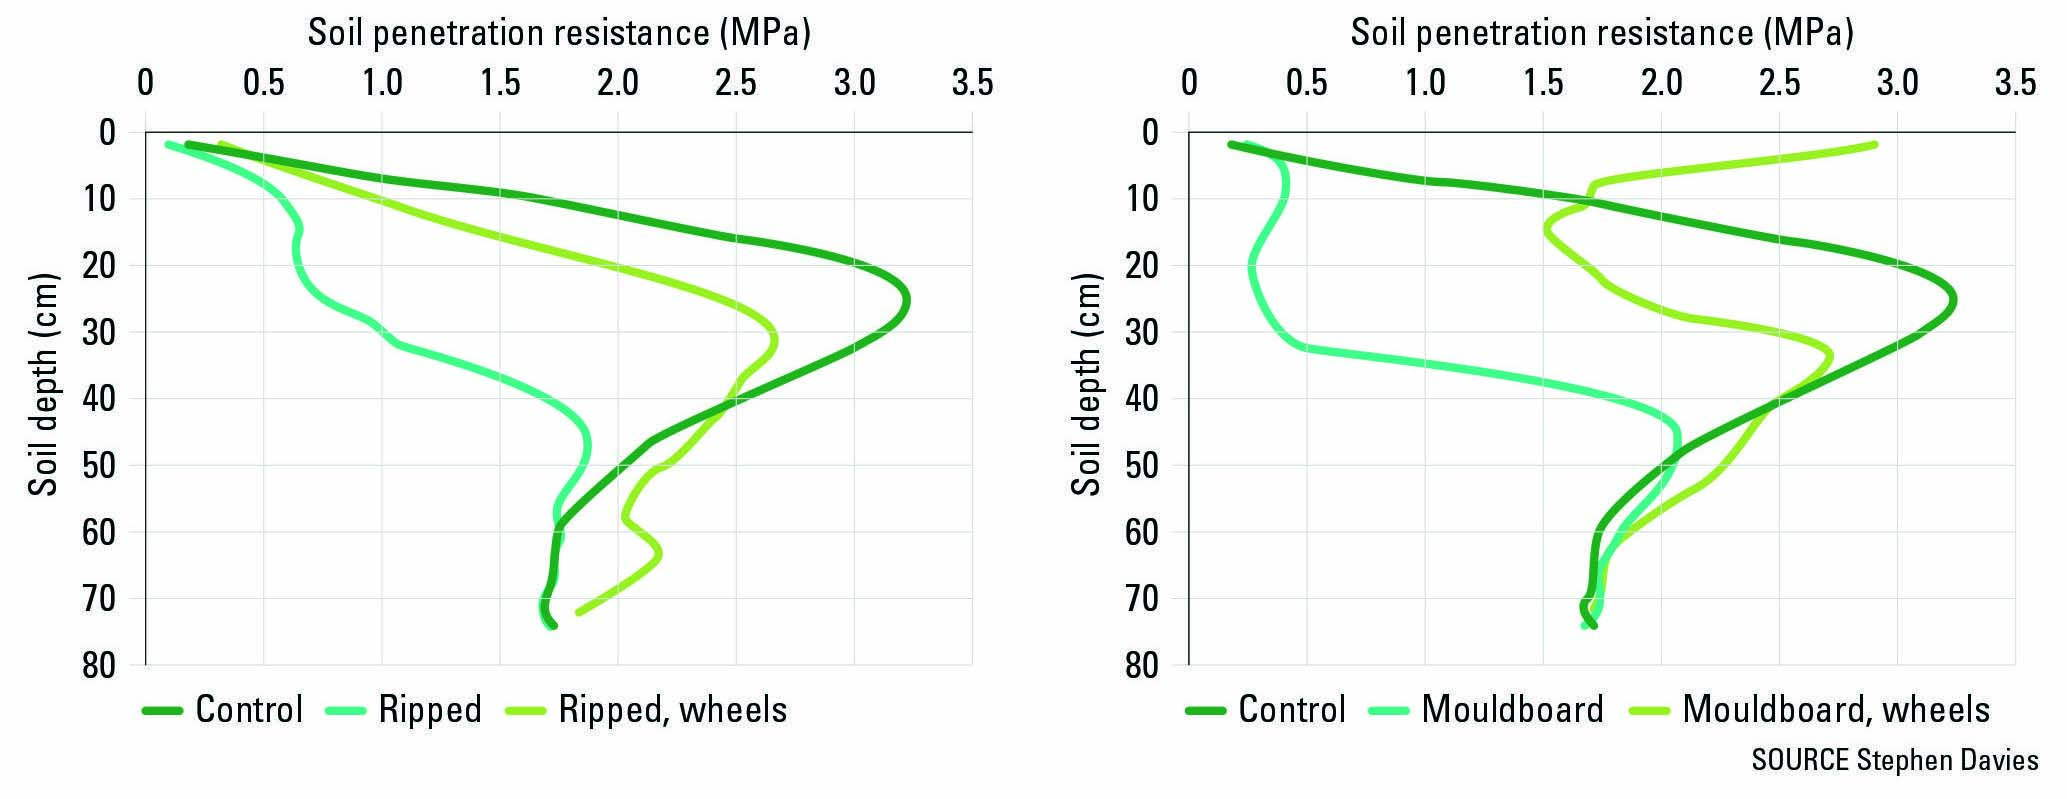 FIGURE 1 Post-ripping traffic quickly led to recompaction of a sandy soil at Marchagee, WA, after deep ripping (left) and mouldboard ploughing (right). Measurements were taken at early emergence after one pass with a tractor, seeding bar and tow-behind seeding box. Control represents pre-amelioration conditions. The high soil strength at the surface in the wheeled mouldboard treatment is due to dry soil conditions at the time of measurement. 